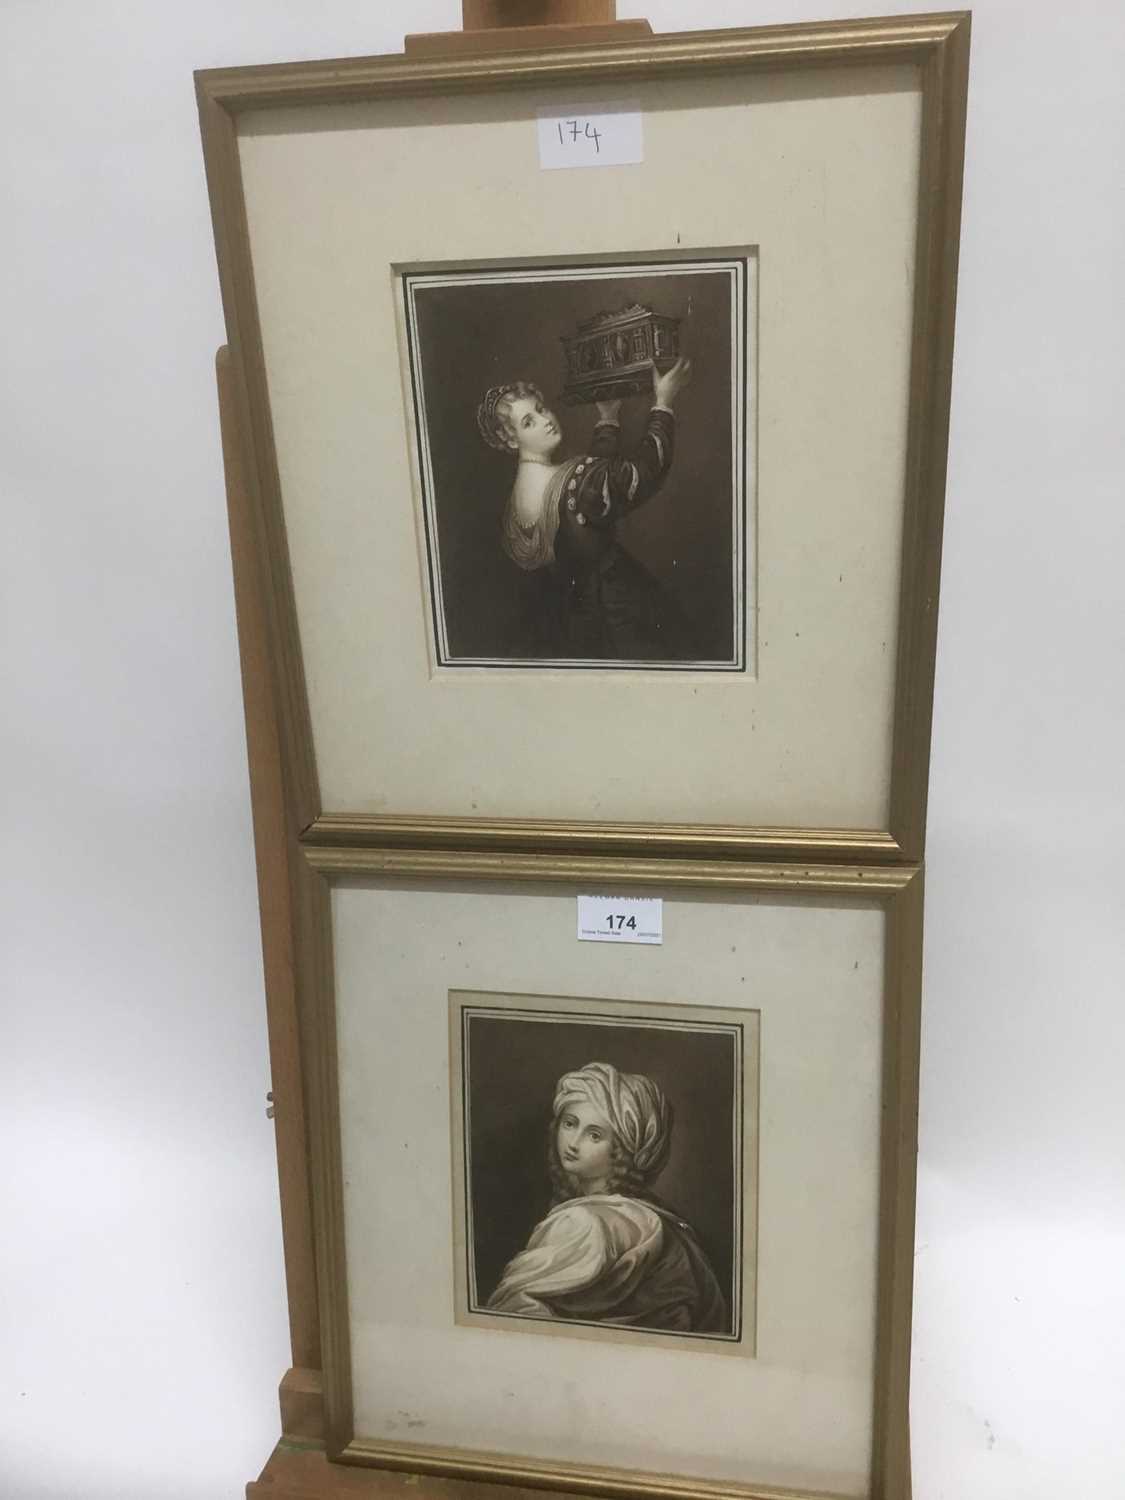 Attributed to George Perfect Harding (1781-1853) pair of monochrome watercolours - Titian's Daughter